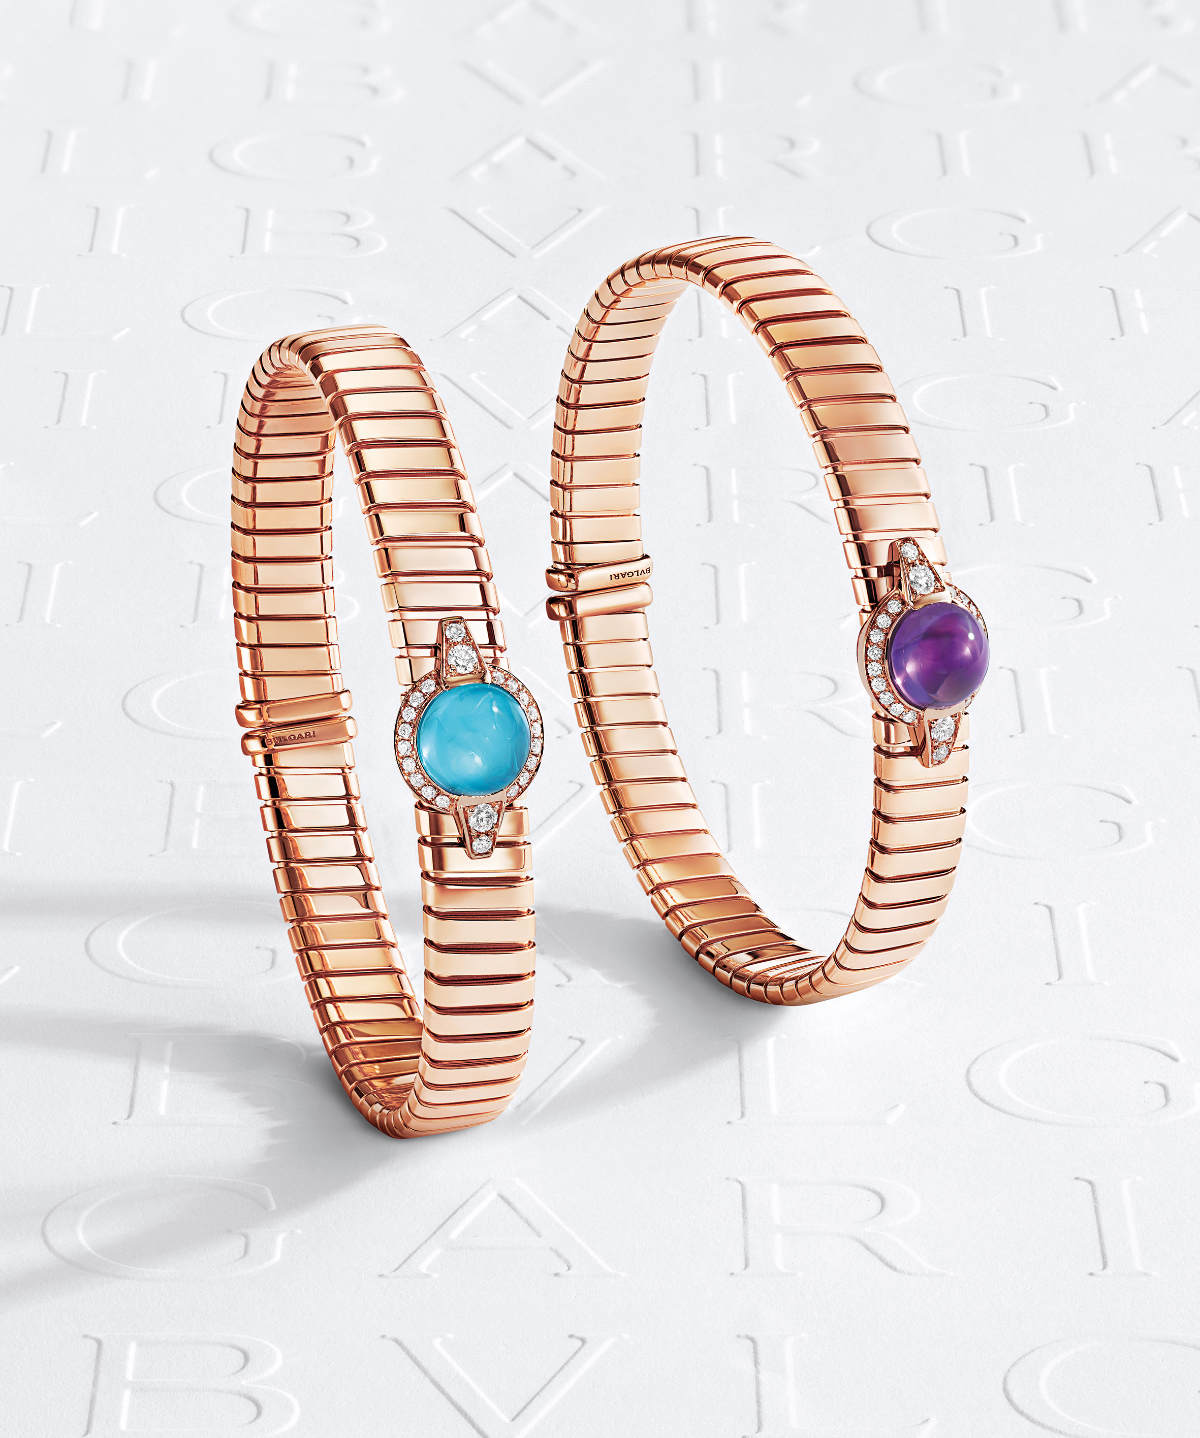 Bulgari Presents Its New 2022 Tubogas Jewellery Capsule Collection - The Return Of An Icon